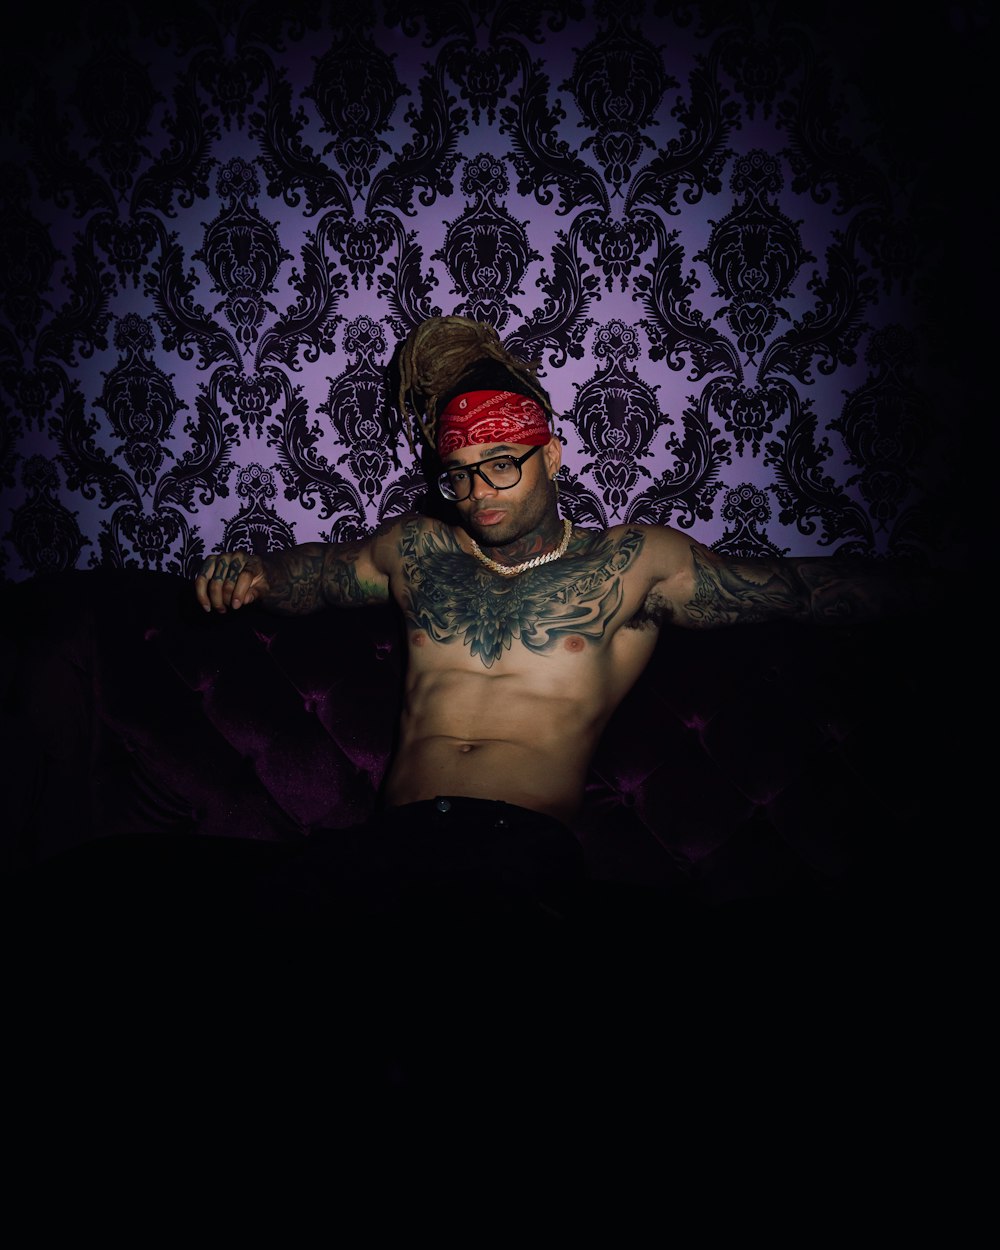 a shirtless man with a bandana on sitting on a couch